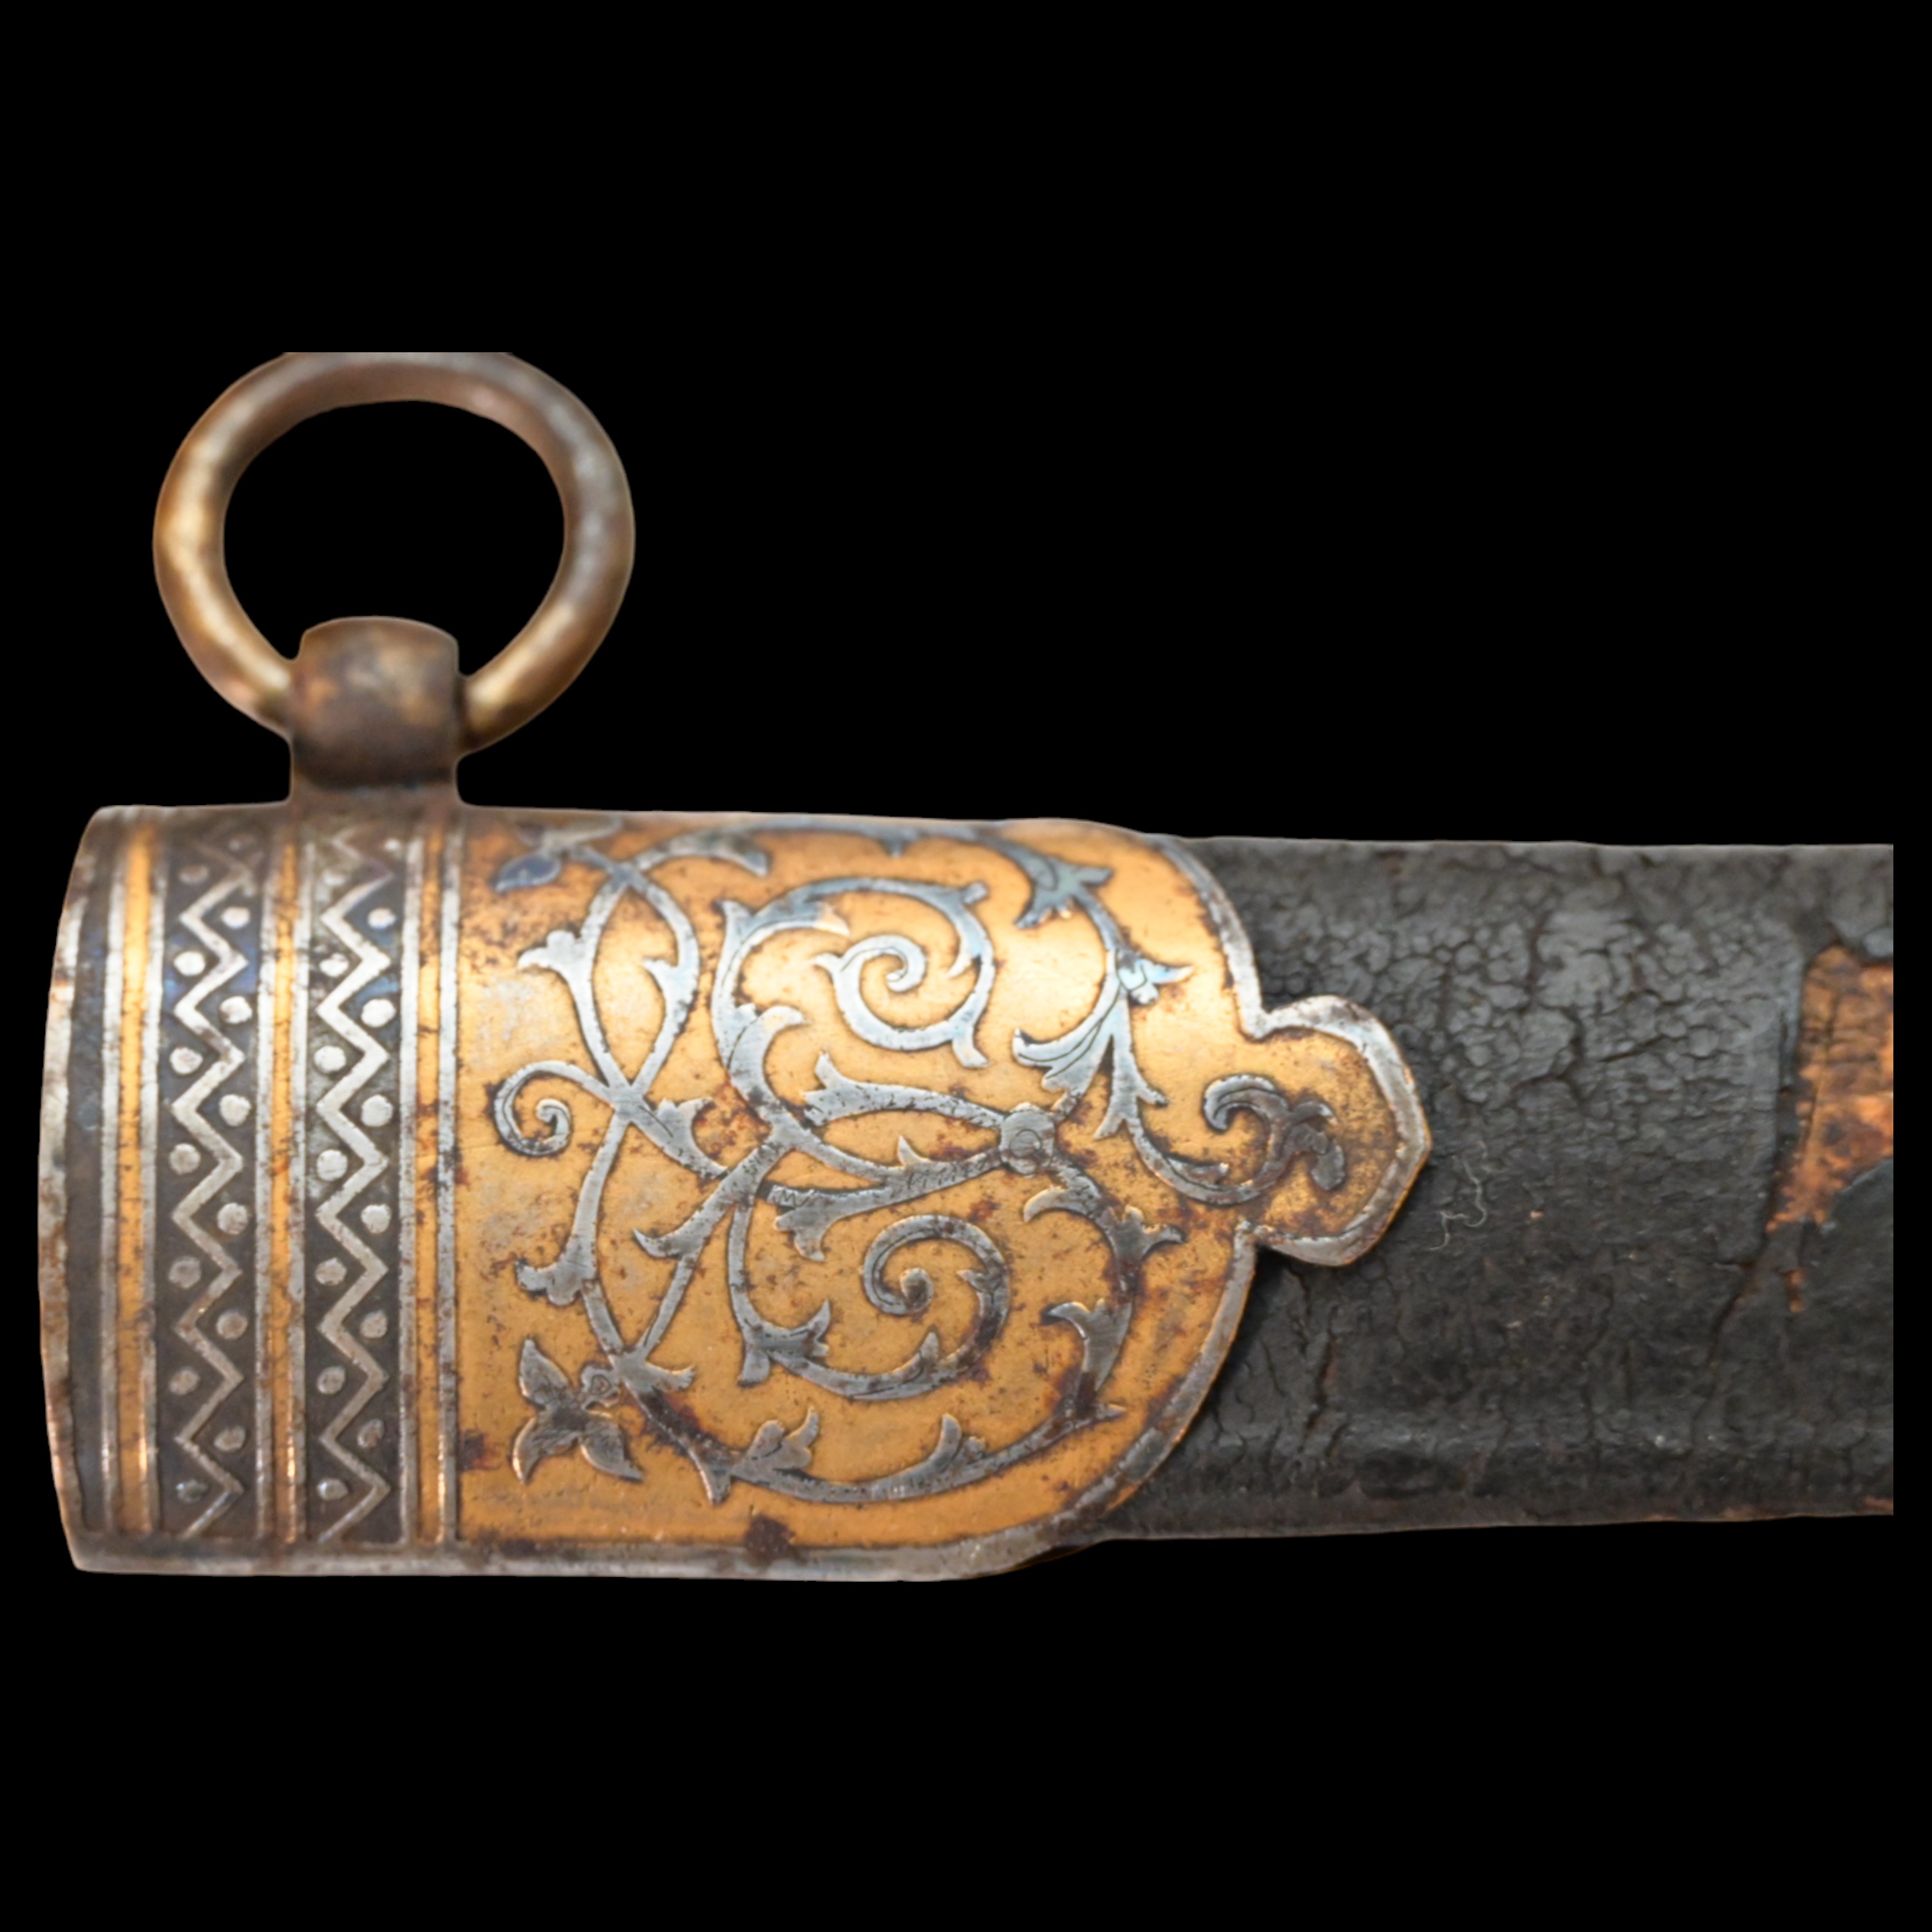 RARE HUNTING KNIFE, DECORATED WITH GOLD AND BLUE, RUSSIAN EMPIRE, ZLATOUST, 1889. - Image 5 of 26